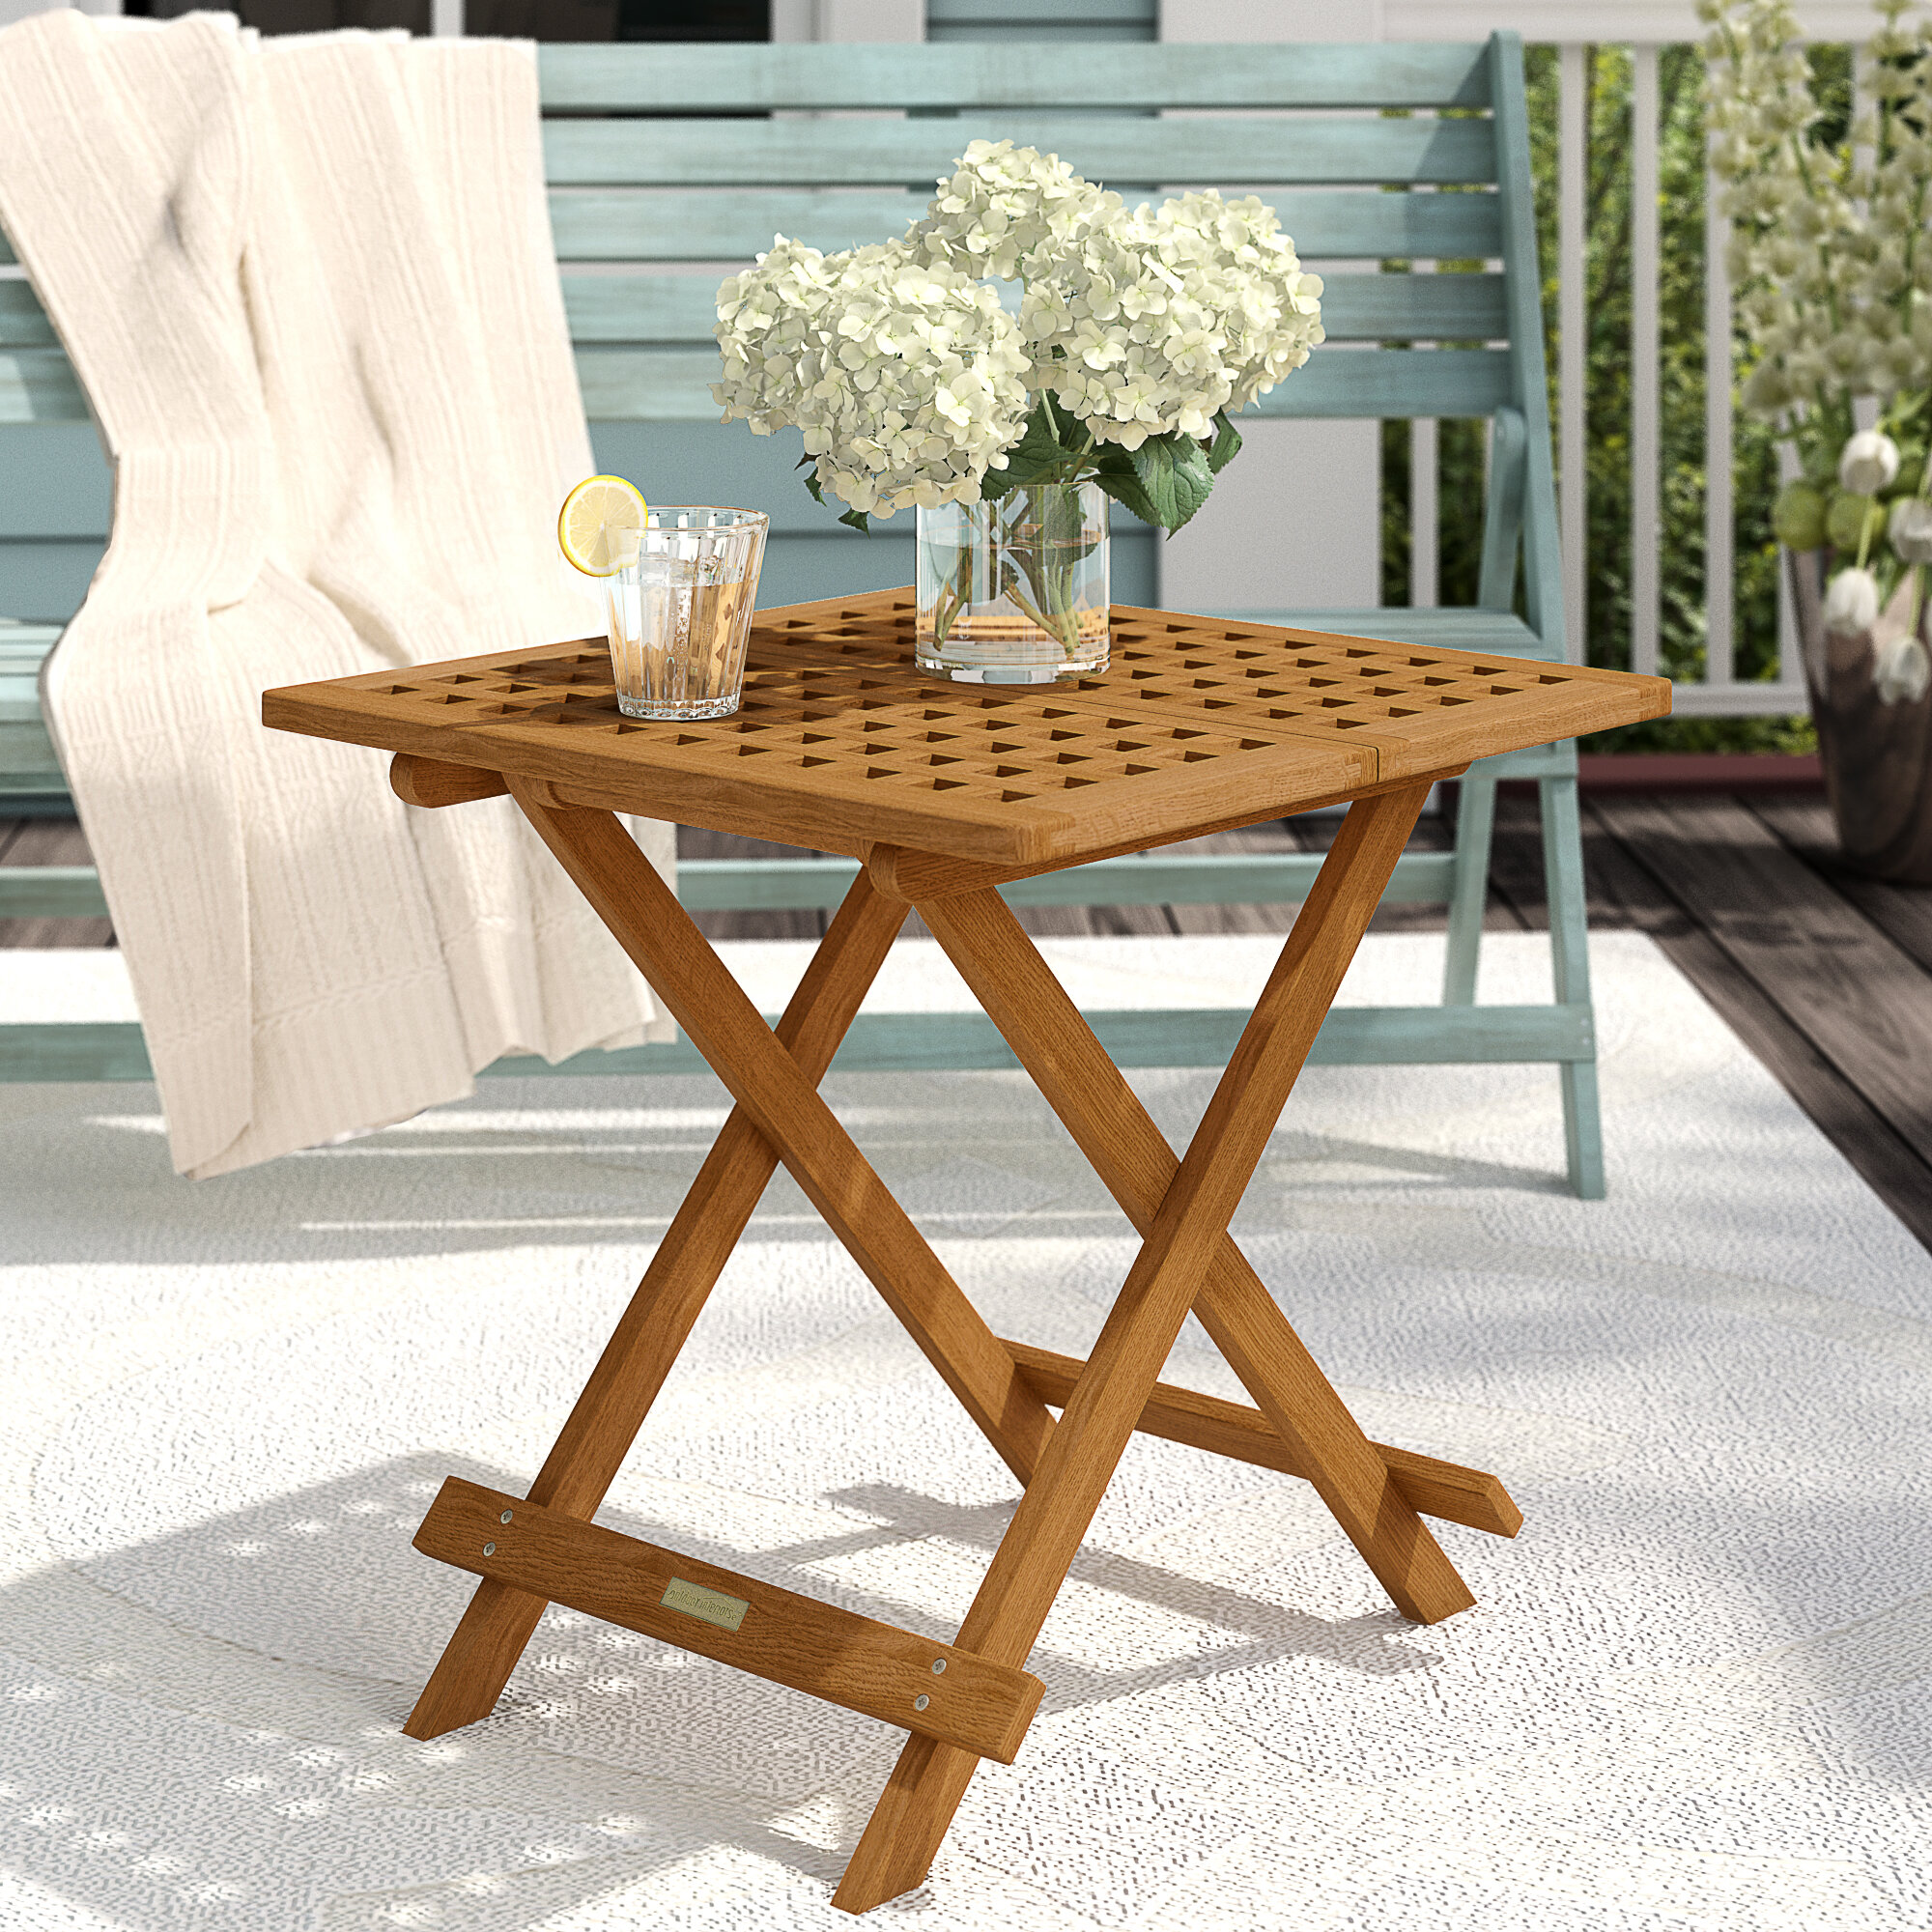 Wooden End Table Chair  . If You Have Any Questions, Comments, Or Suggestions About Our Site Or Our Products, Please Contact Us At Your Convenience.